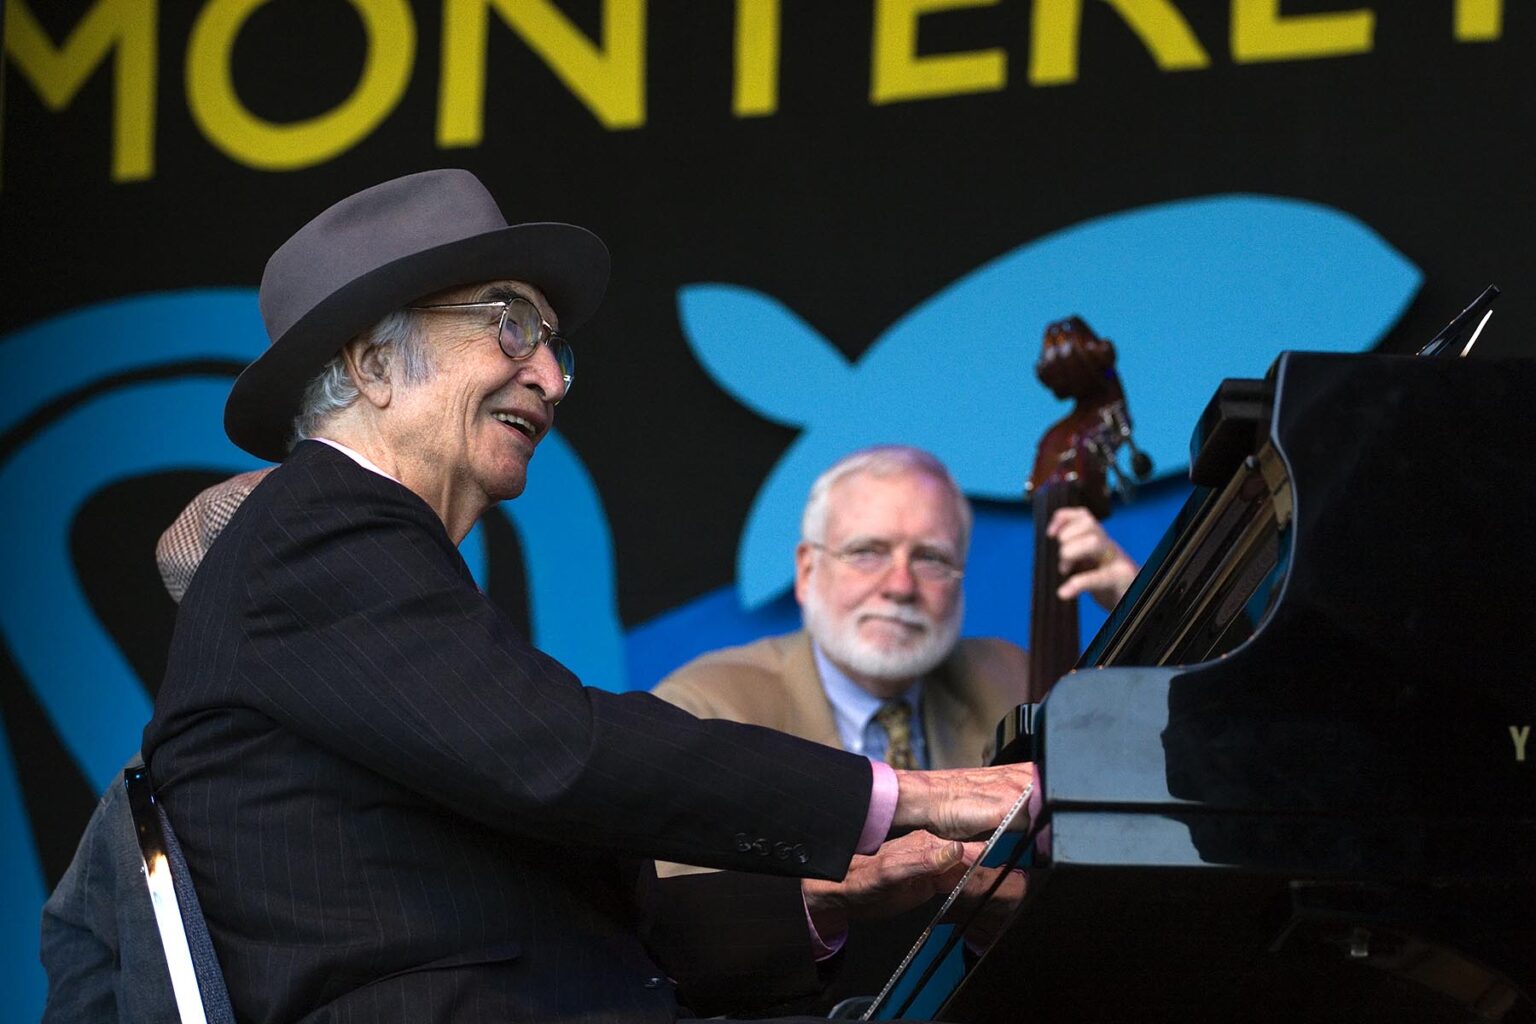 DAVE BRUBECK (Piano) performs with the DAVE BRUBECK QUARTET and Special Guests at THE MONTEREY JAZZ FESTIVAL